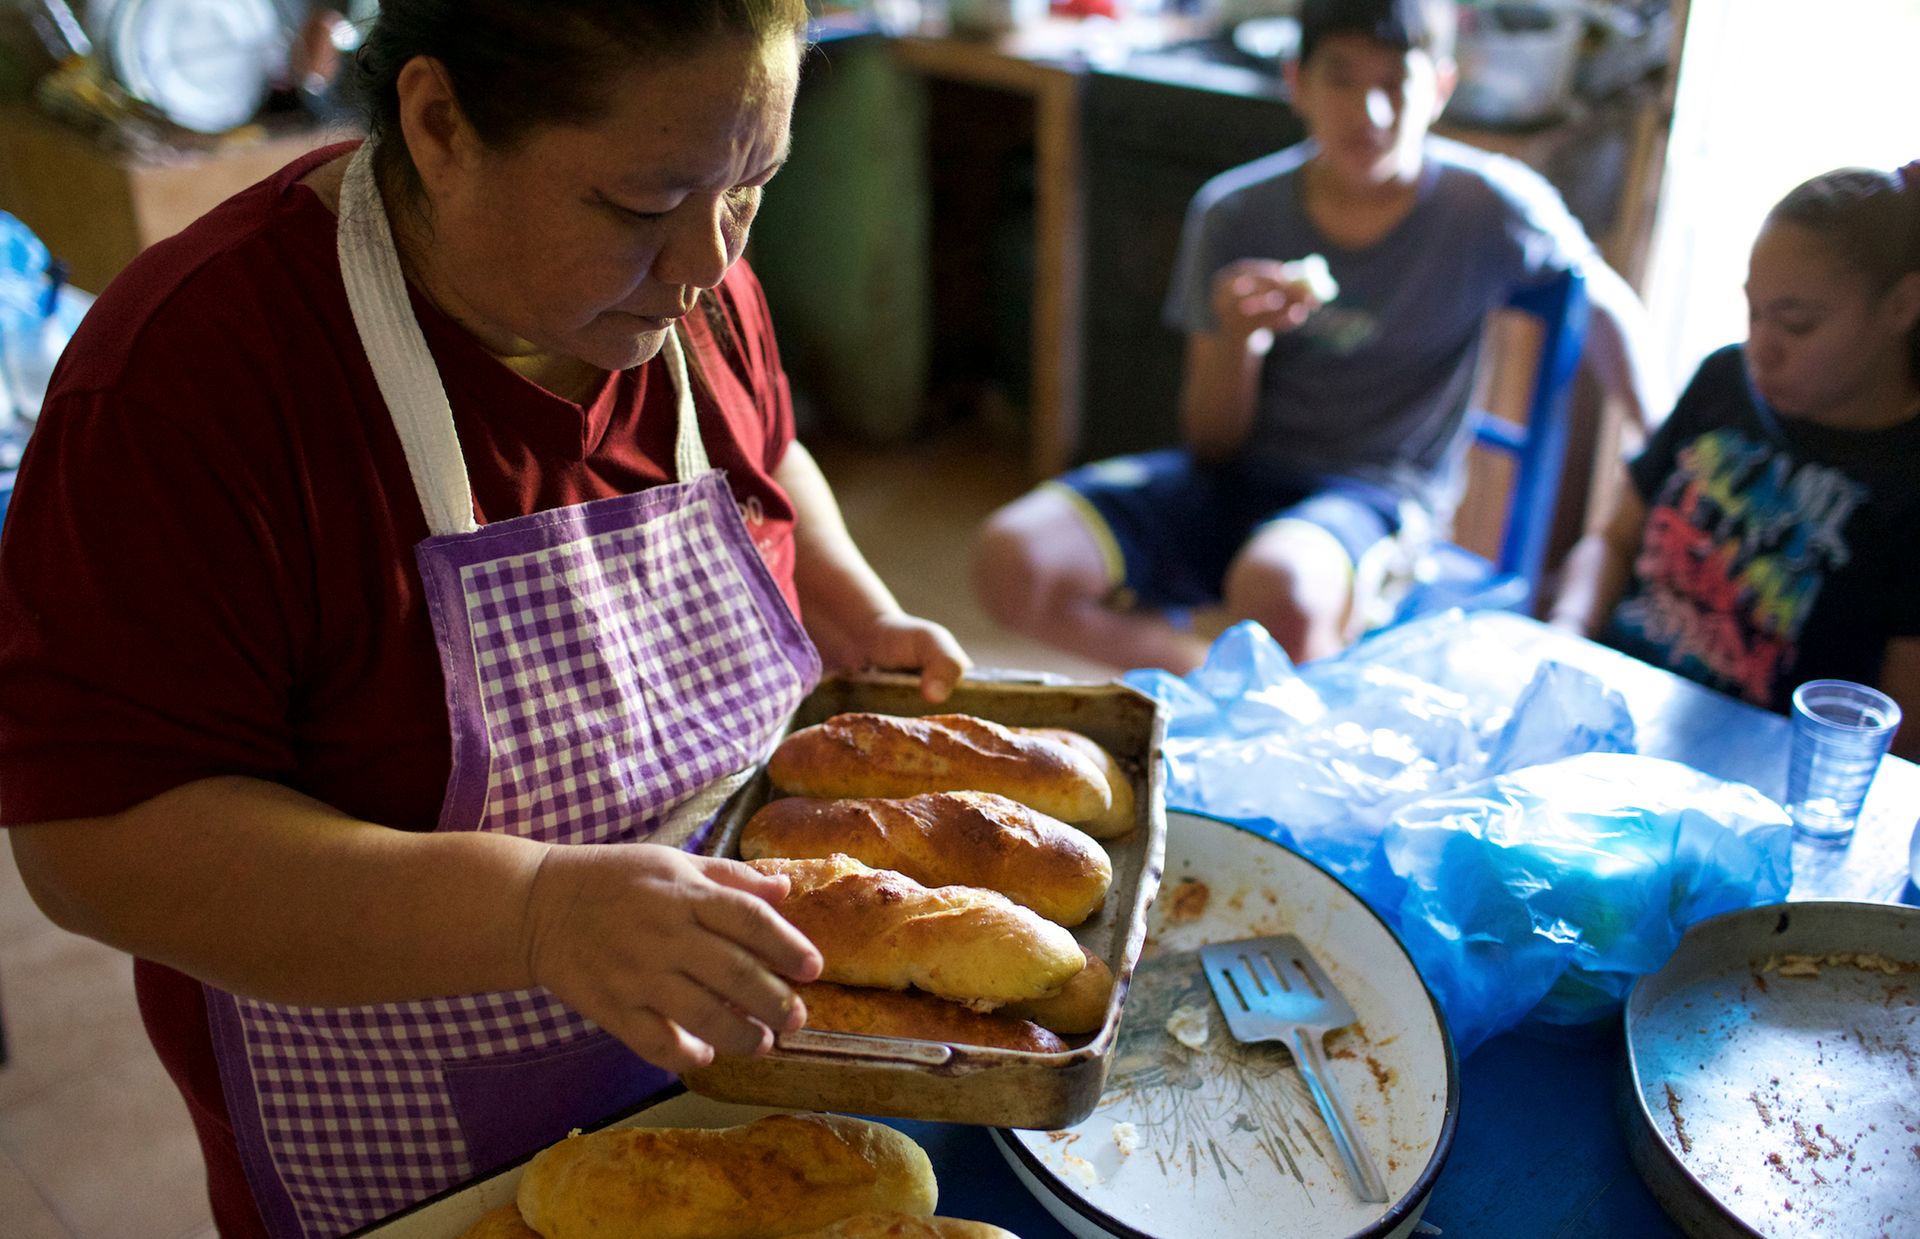 The loaves Adriana sells help her family become more self-reliant by increasing the family income. She sets a few loaves aside to share with her family.